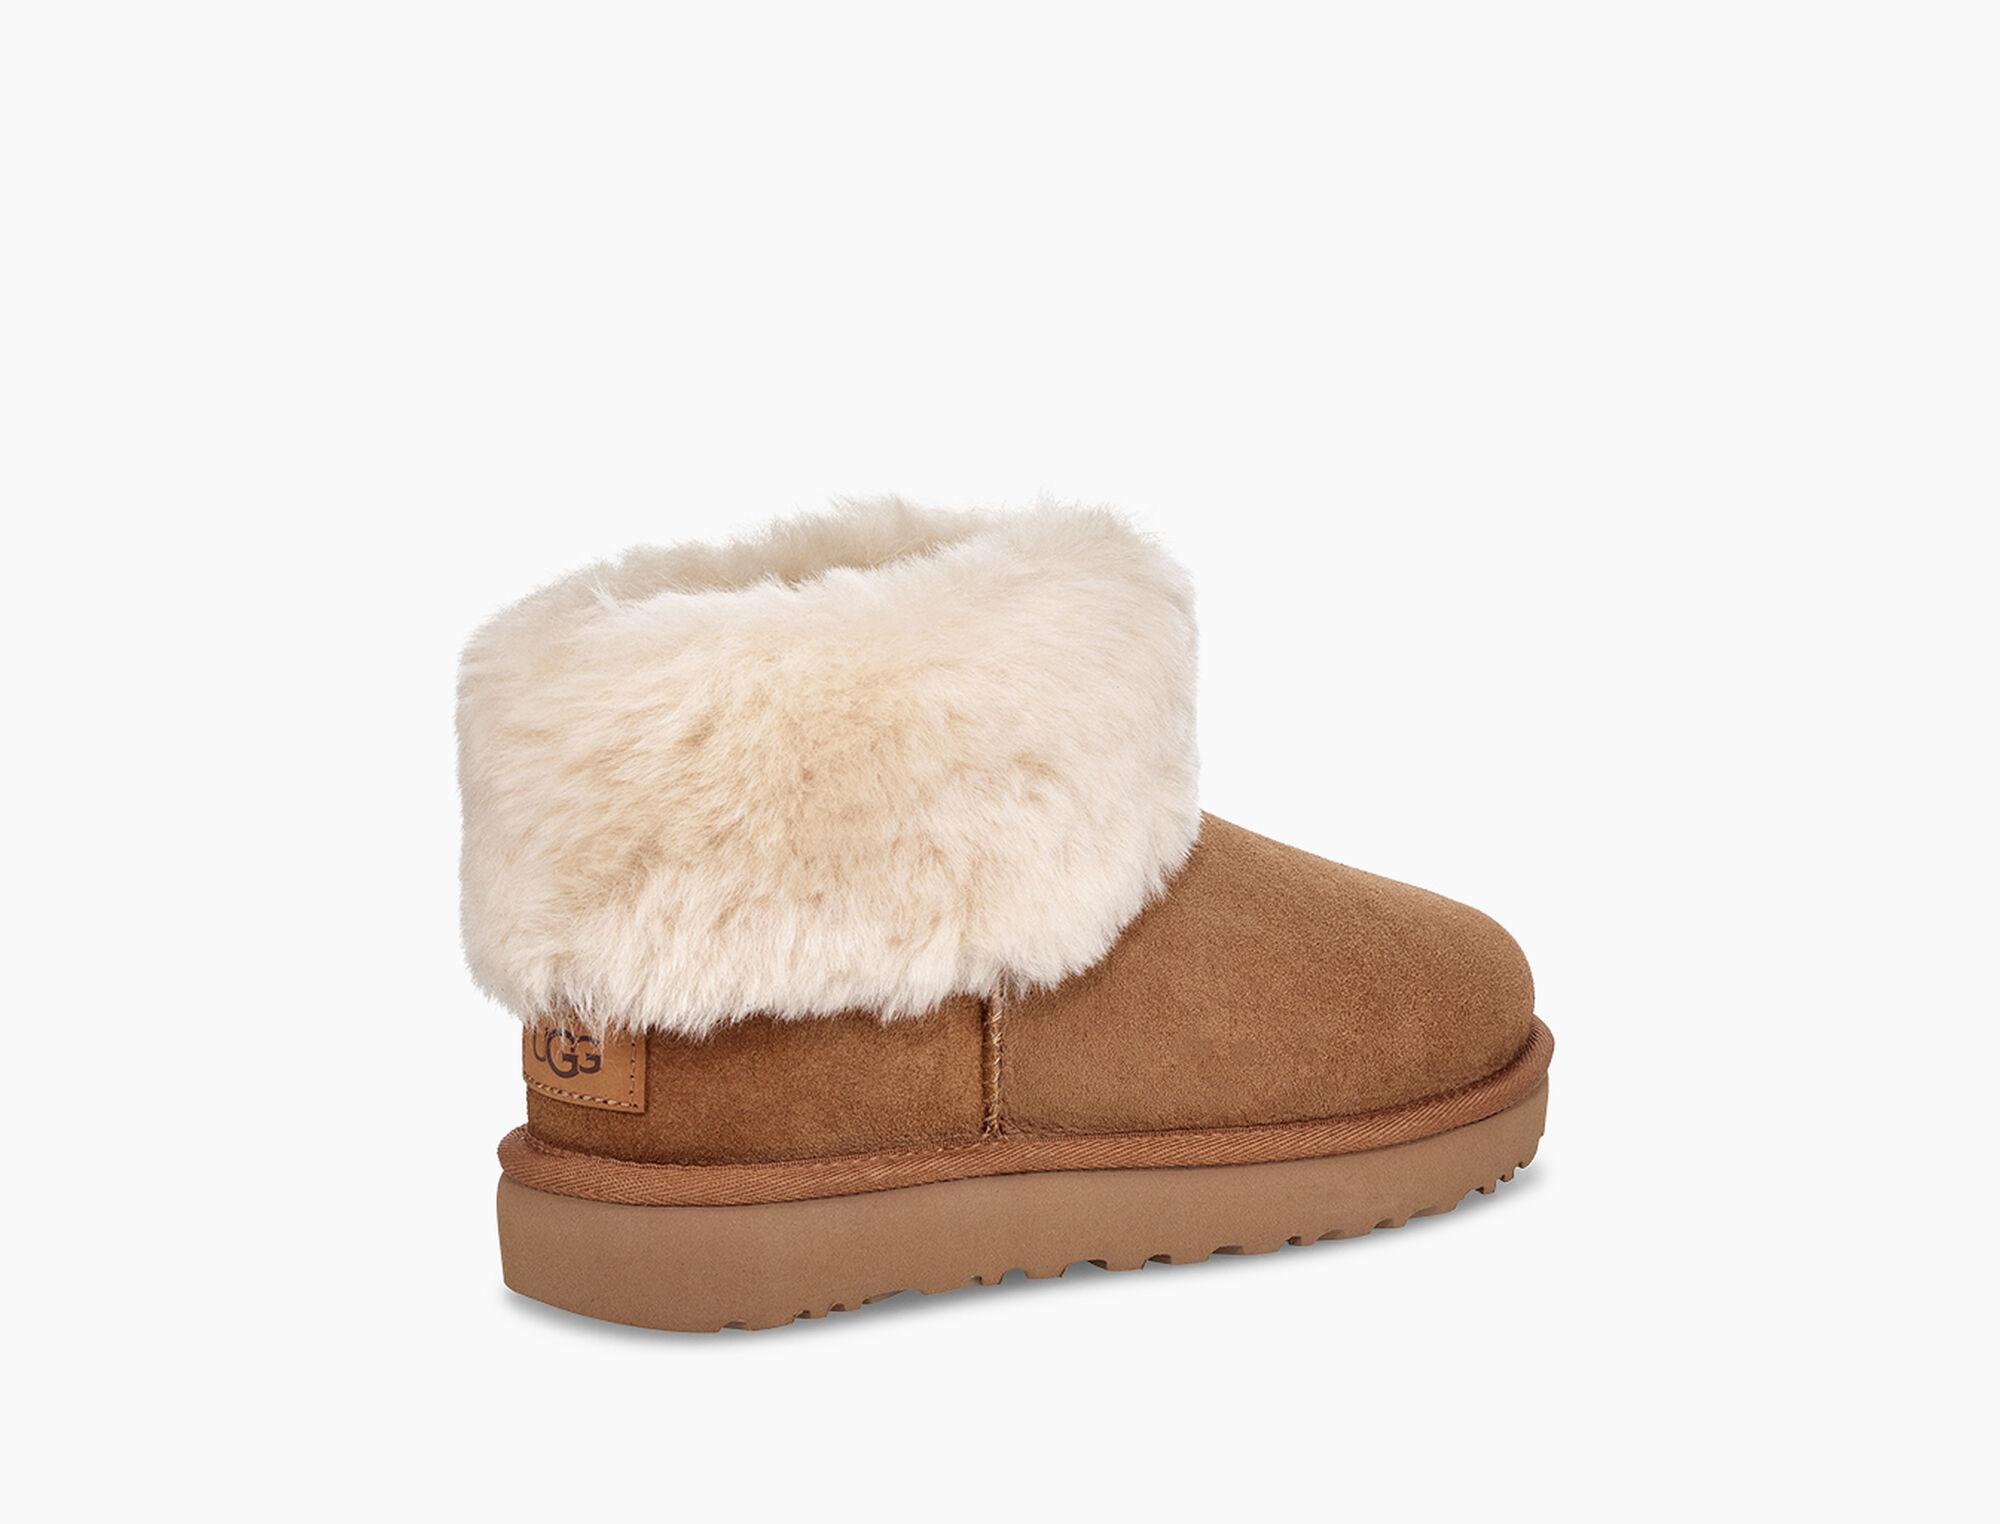 UGG Synthetic Classic Mini Fluff Booties in Chestnut (Brown) - Save 4% ...